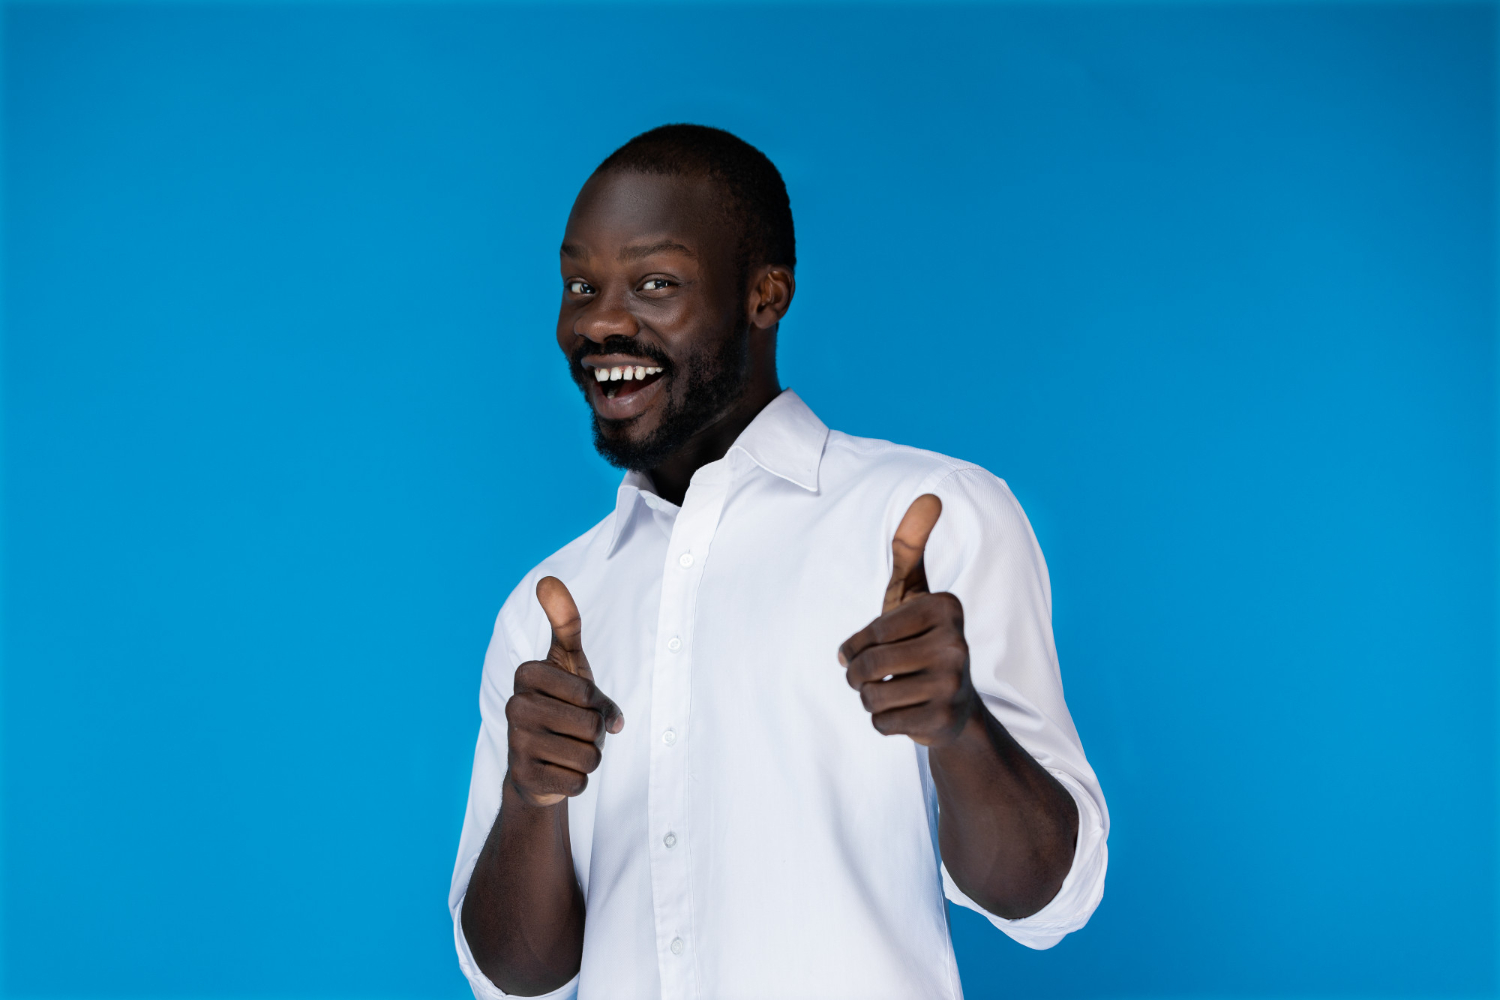 Man shows his thumbs up while smiling